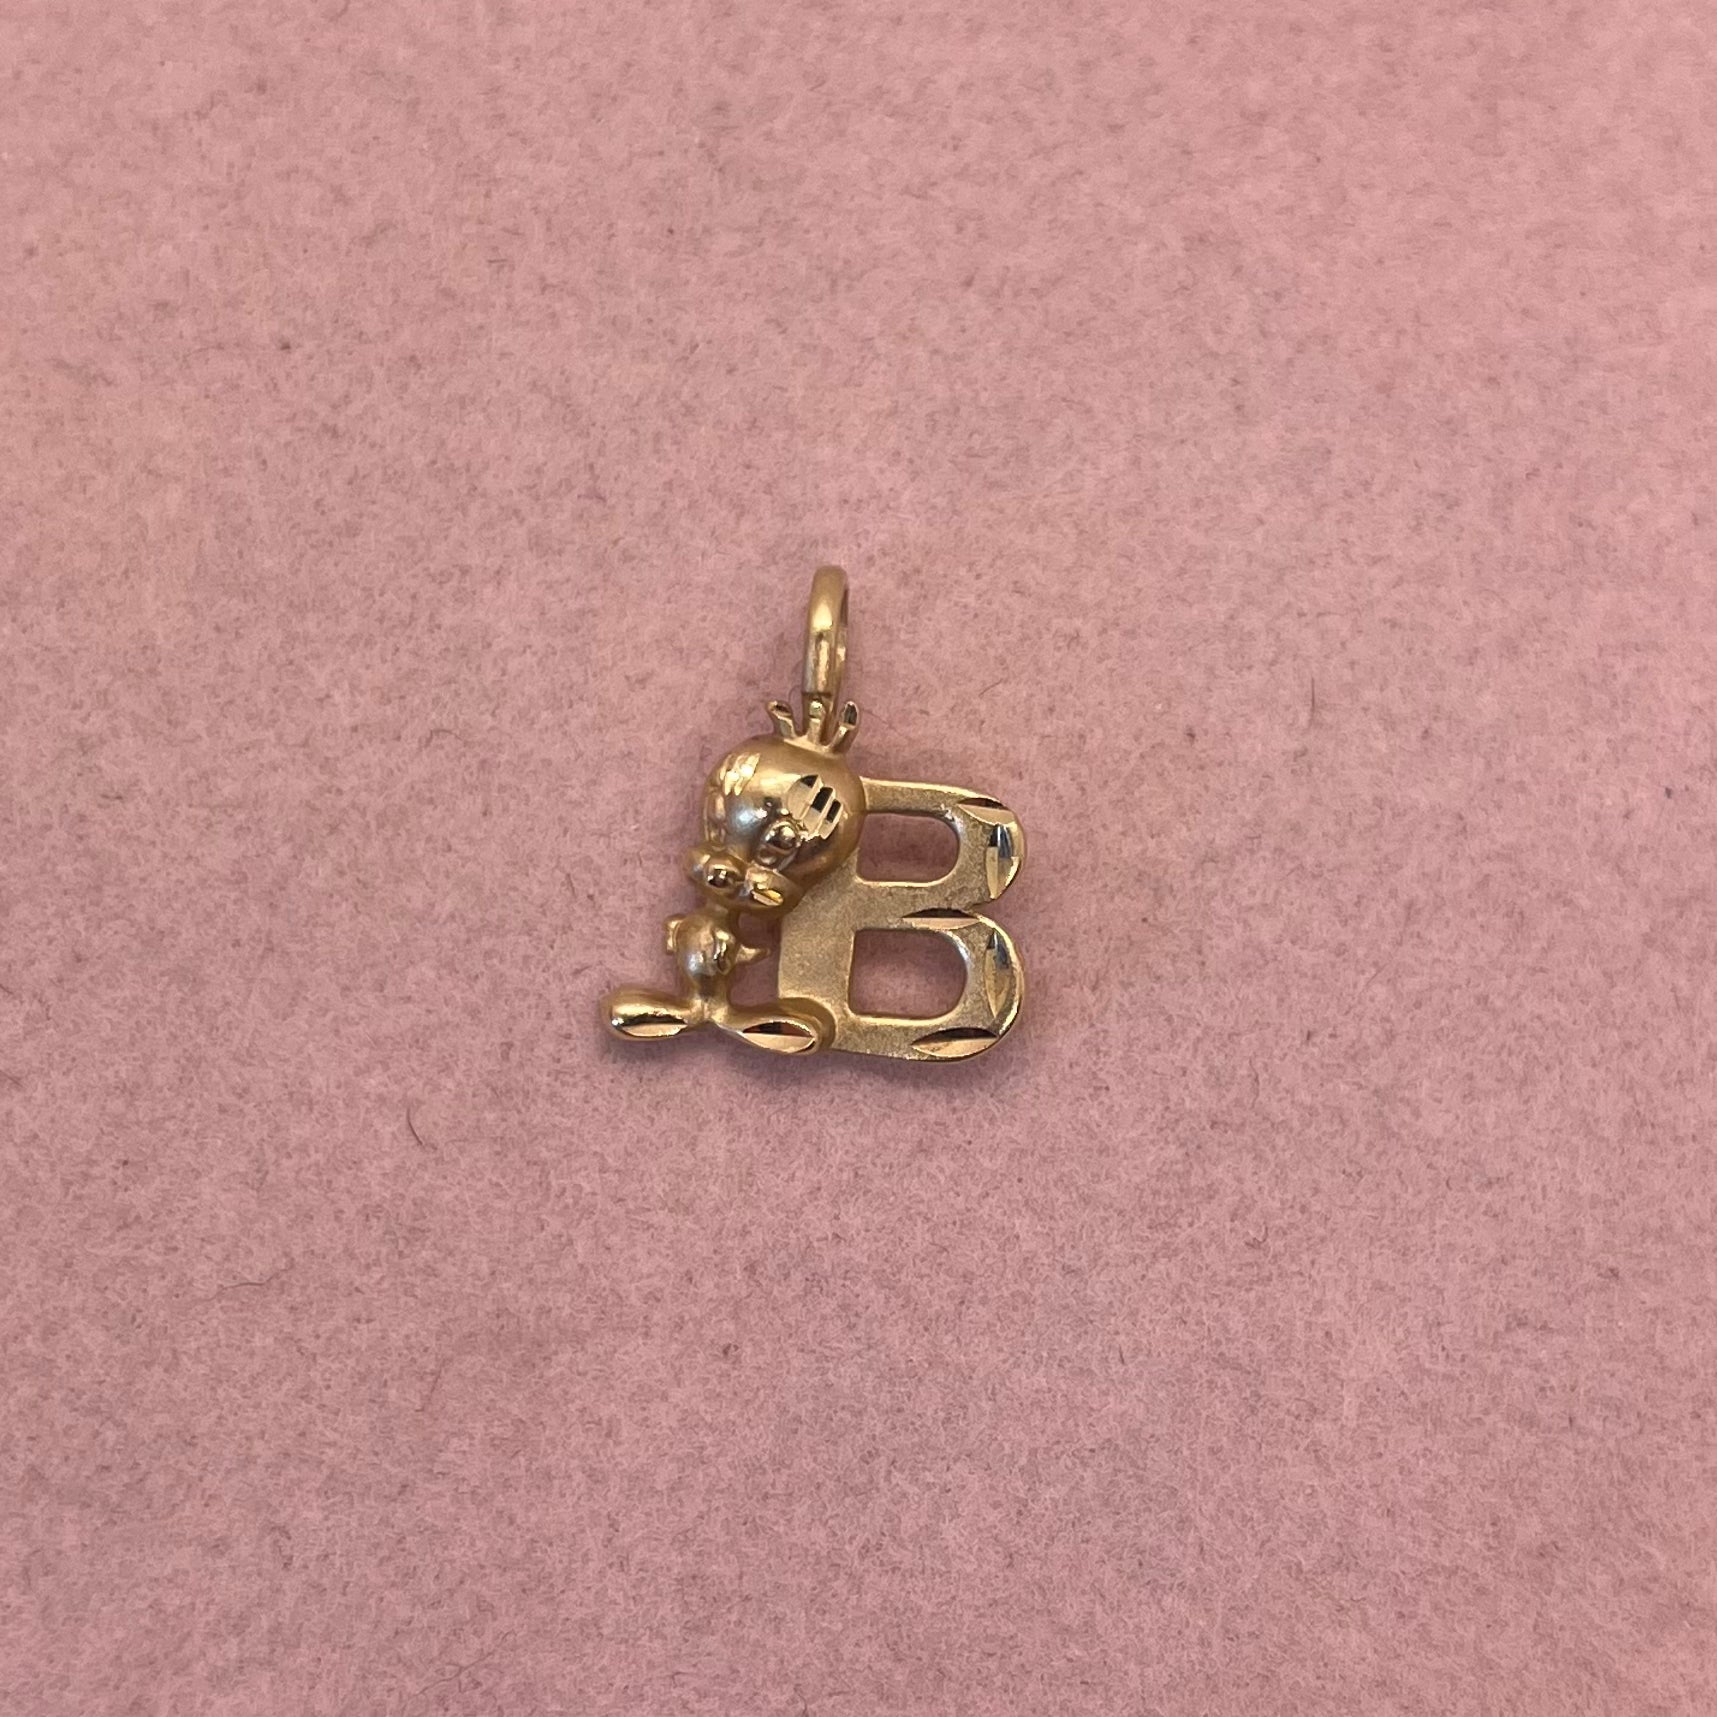 Tweety and Taz Initial Charms by Michael Anthony (1995)